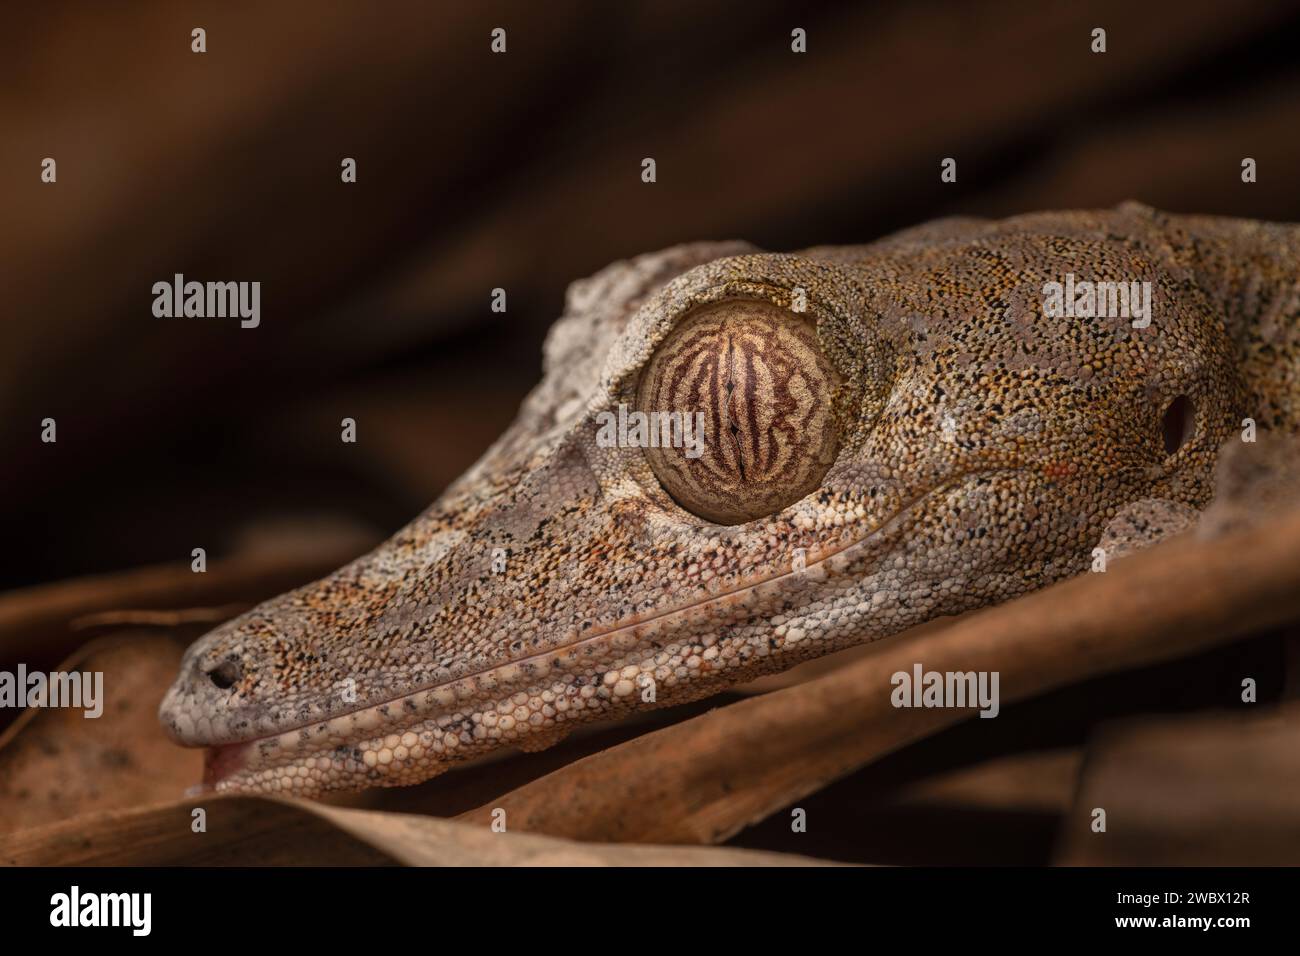 Close-up portrait of a giant leaf-tailed gecko from Madagascar Stock Photo